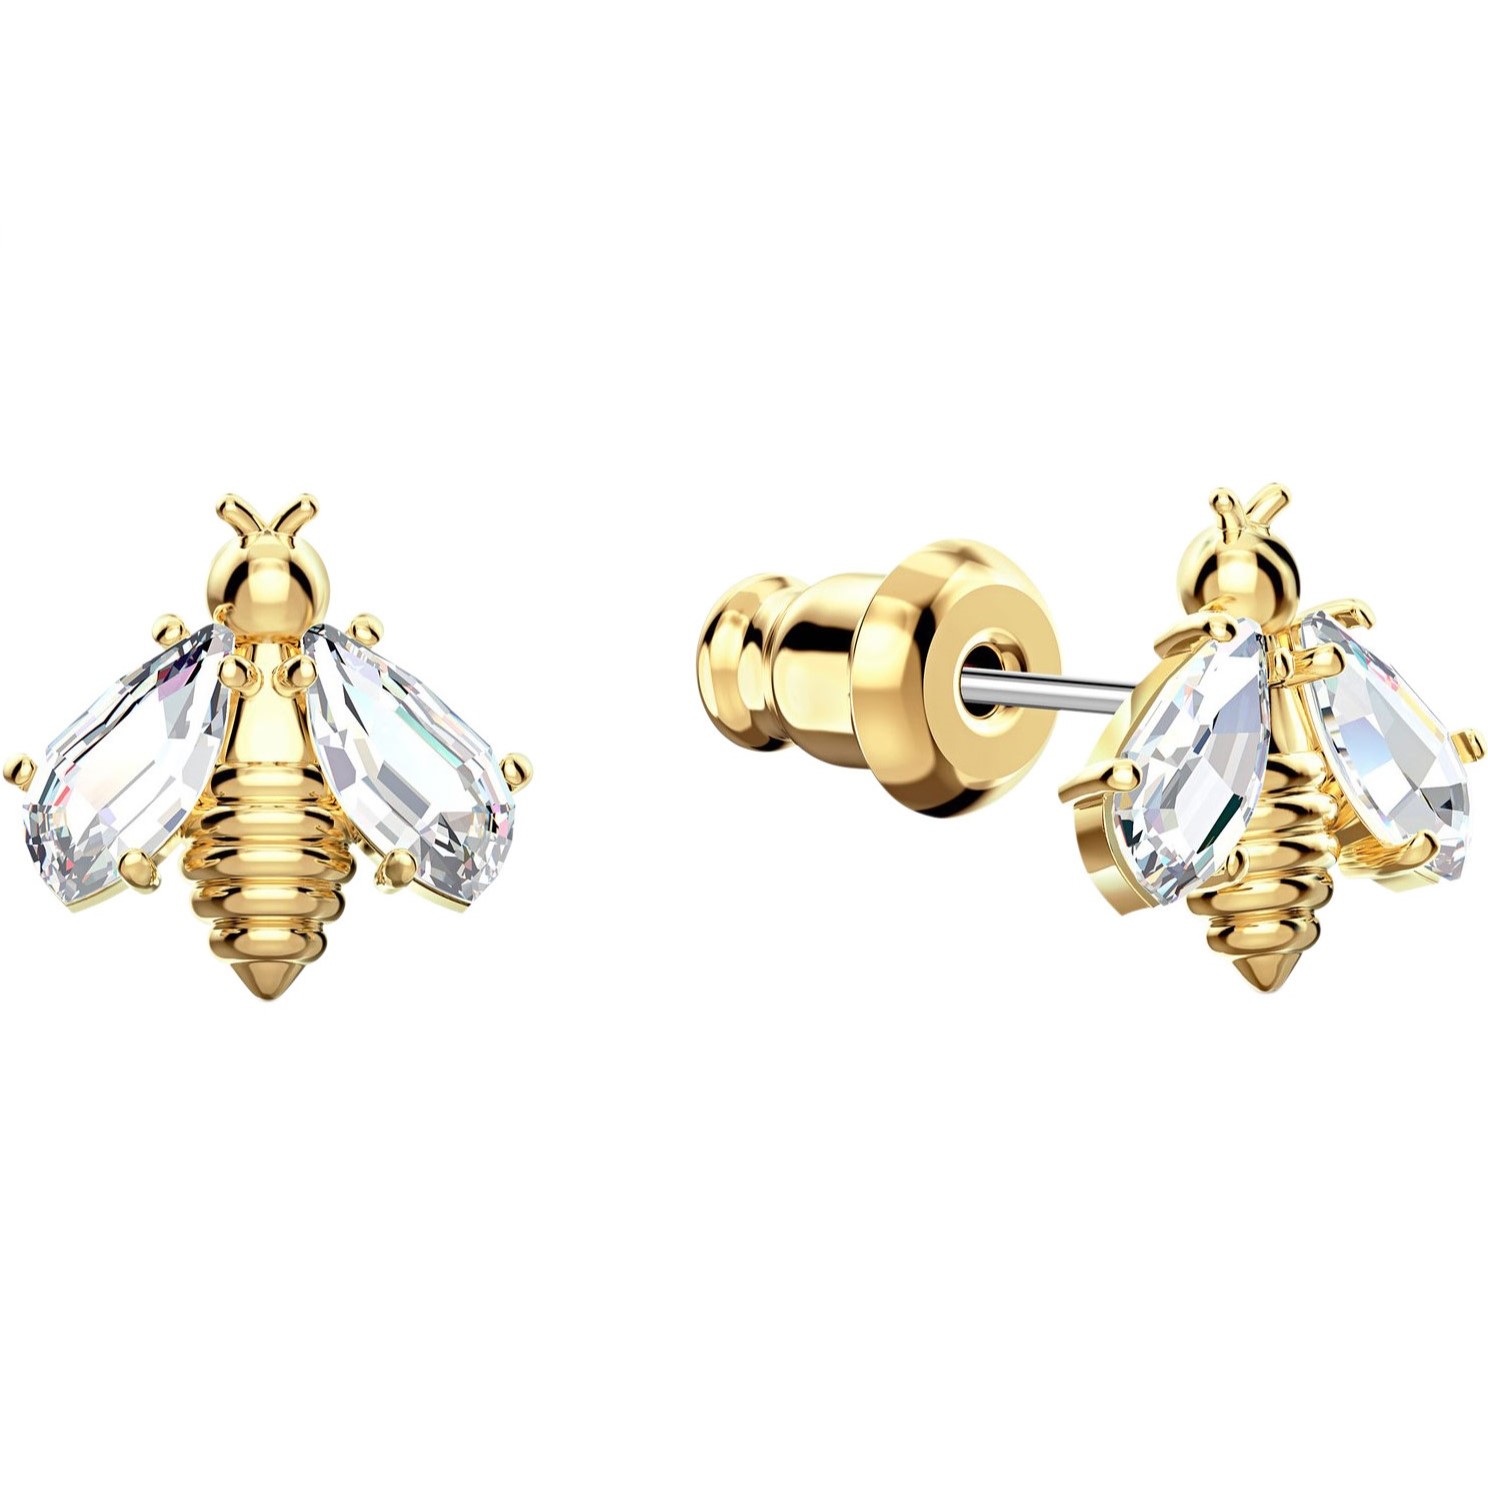 BÔNG TAI SWAROVSKI CON ONG ETERNAL FLOWER STUD EARRINGS BEE WHITE GOLD-TONE PLATED 5538087 3